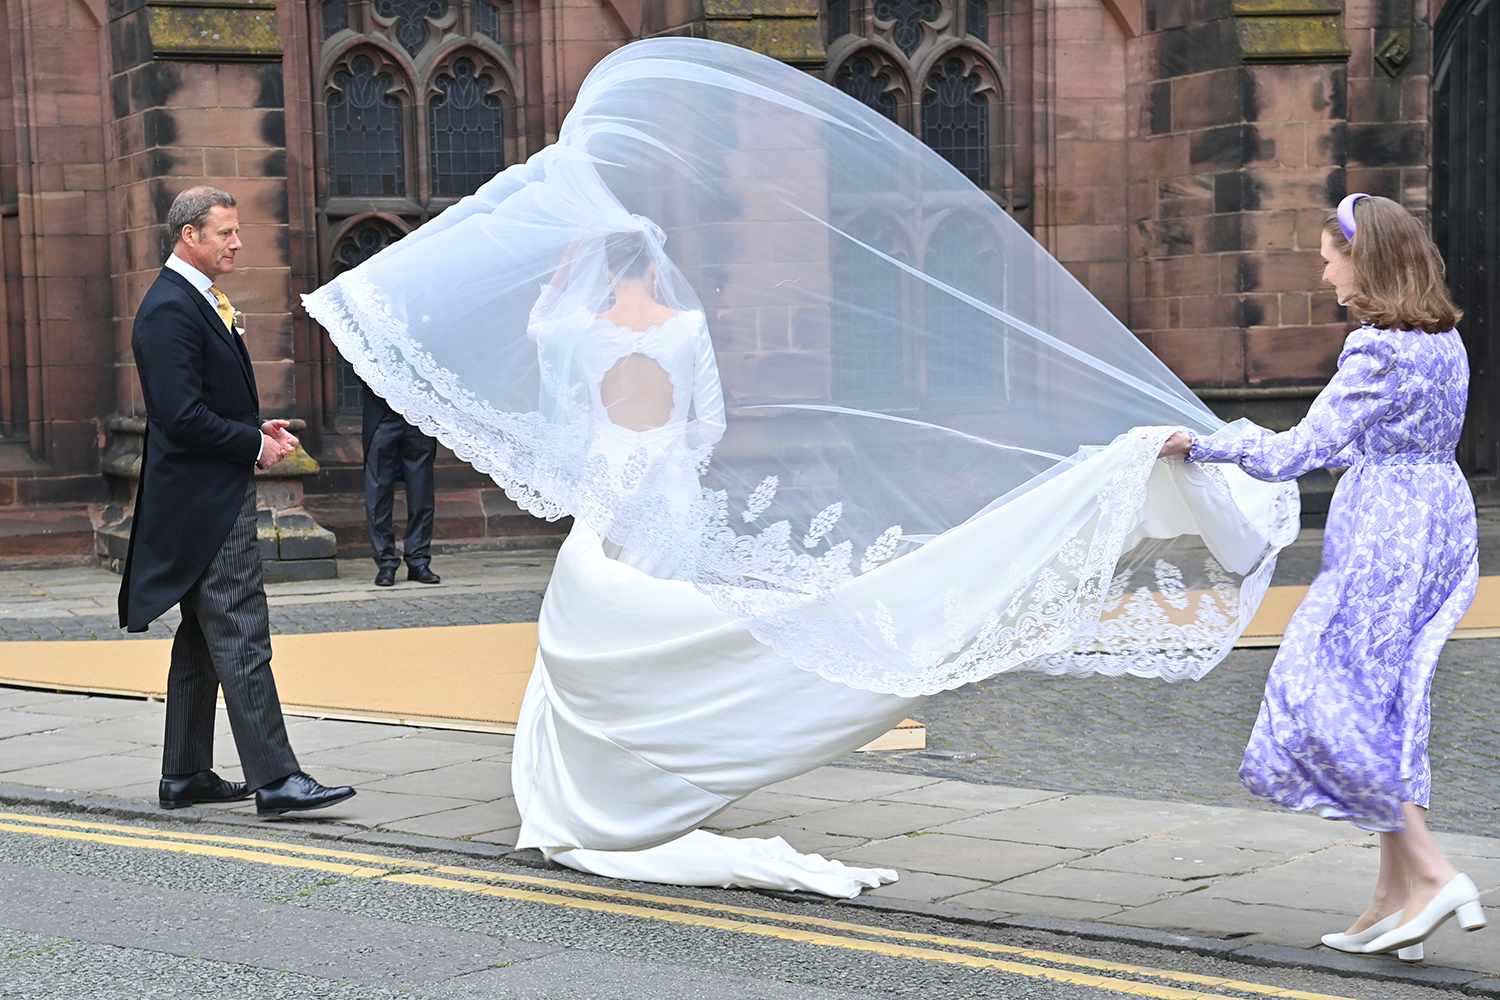 Olivia Henson (C) arrives at her wedding to Hugh Grosvenor, 7th Duke of Westminster, at Chester Cathedral